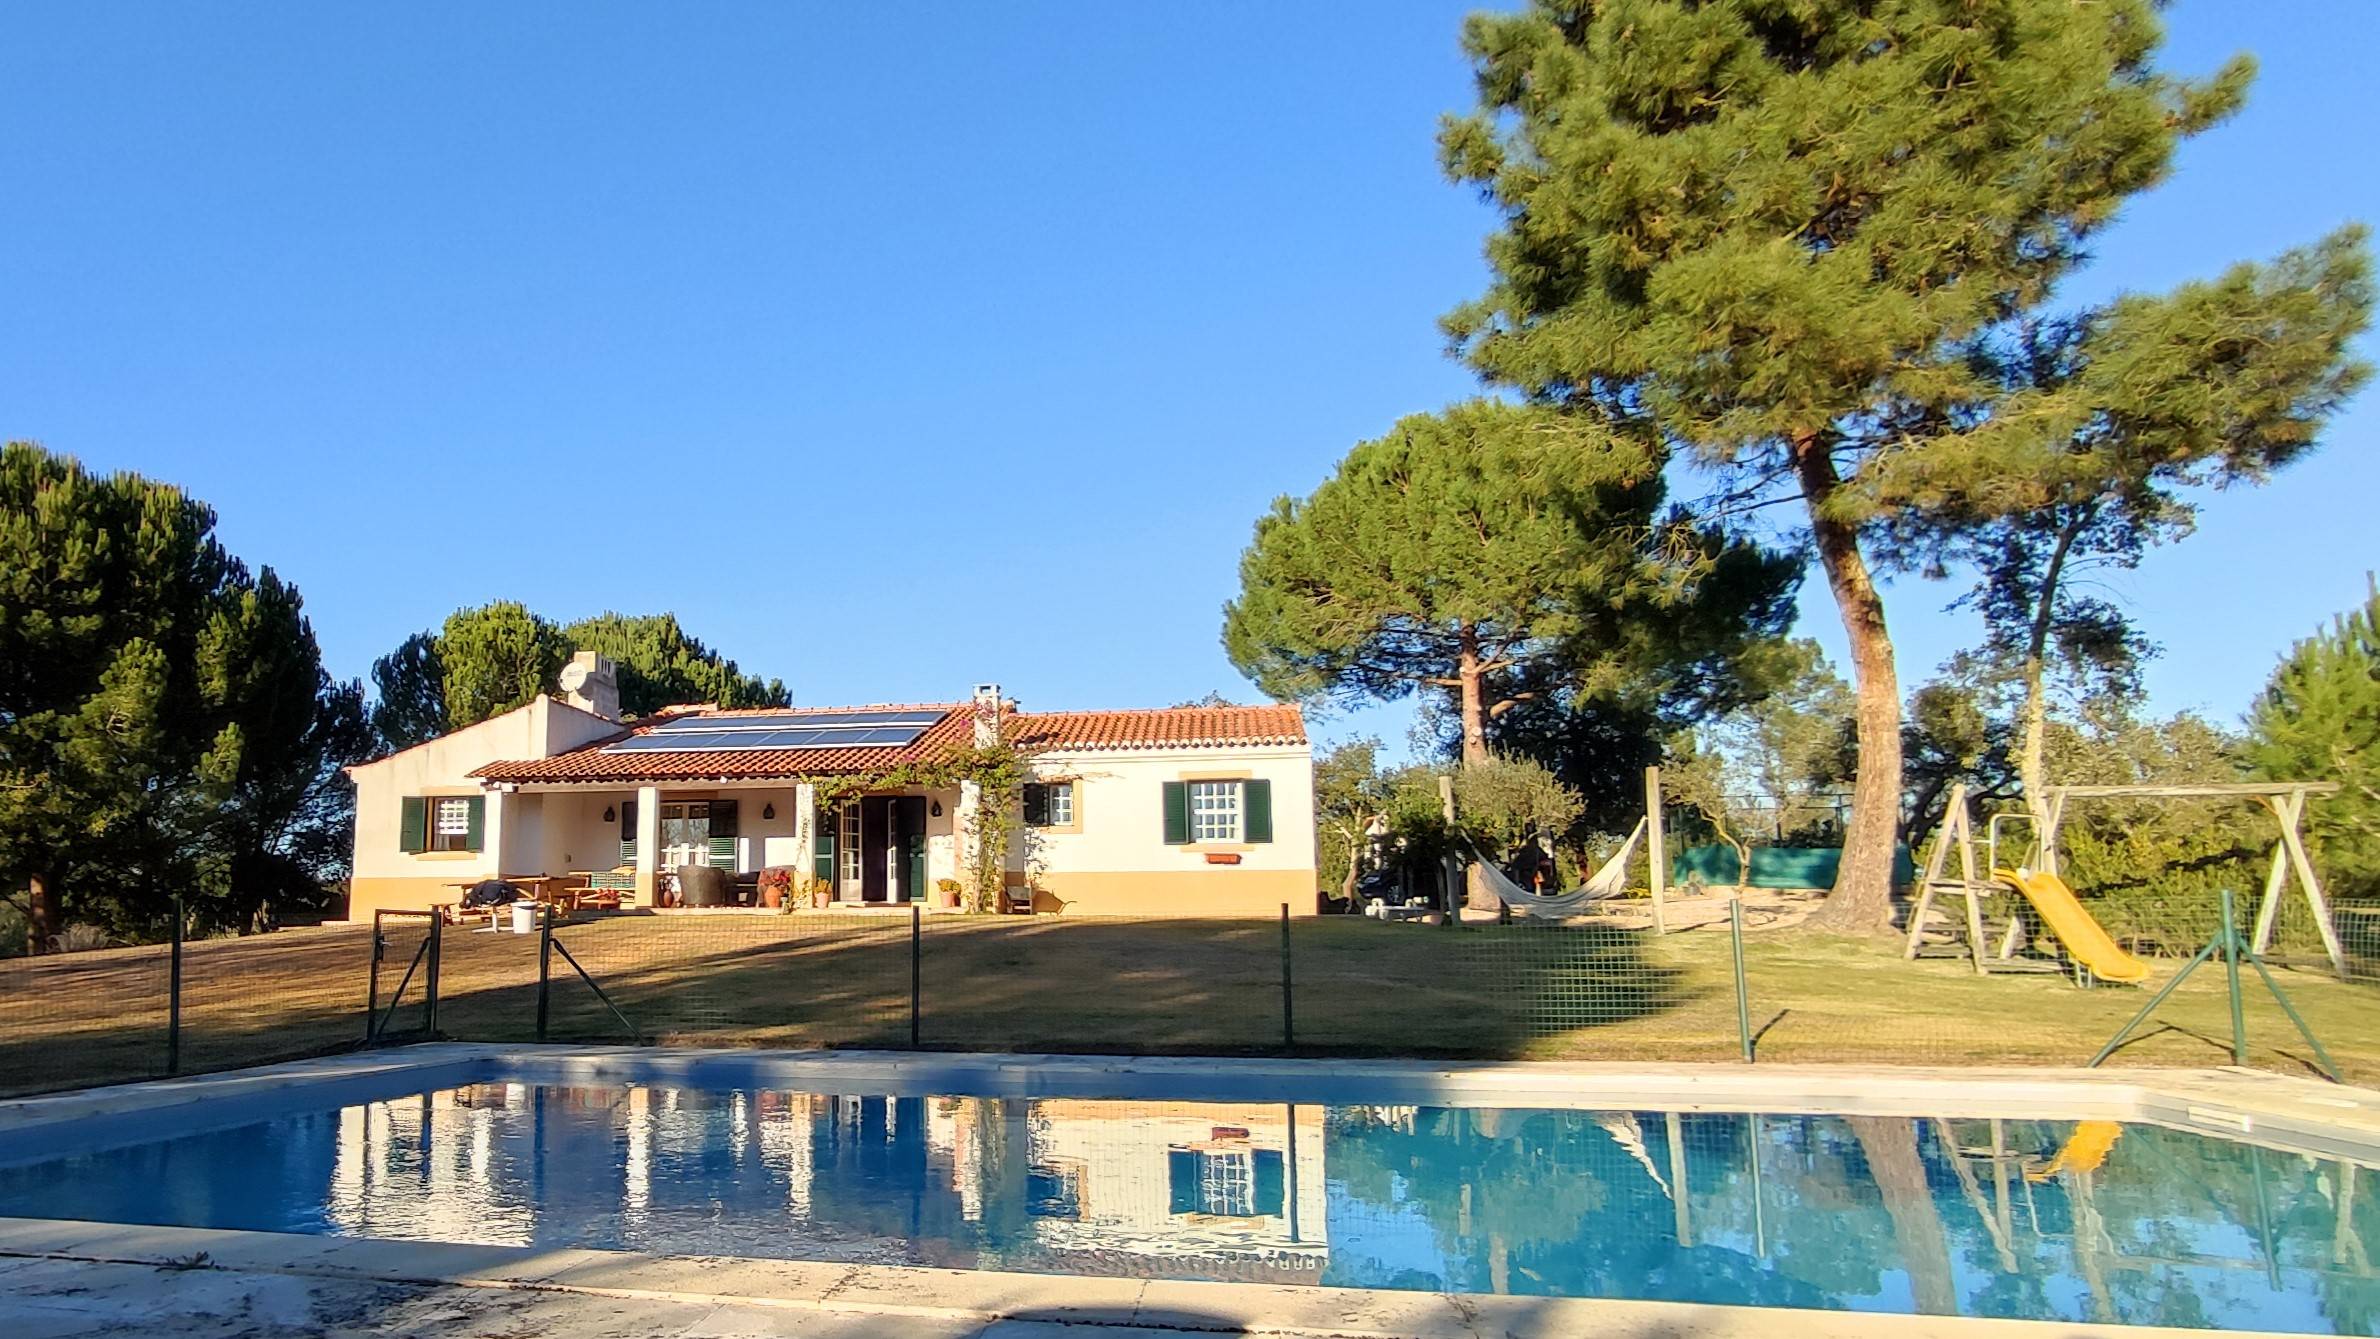 Tranquil Villa | 3 bedrooms | Private Pool | 40 min from Lisbon